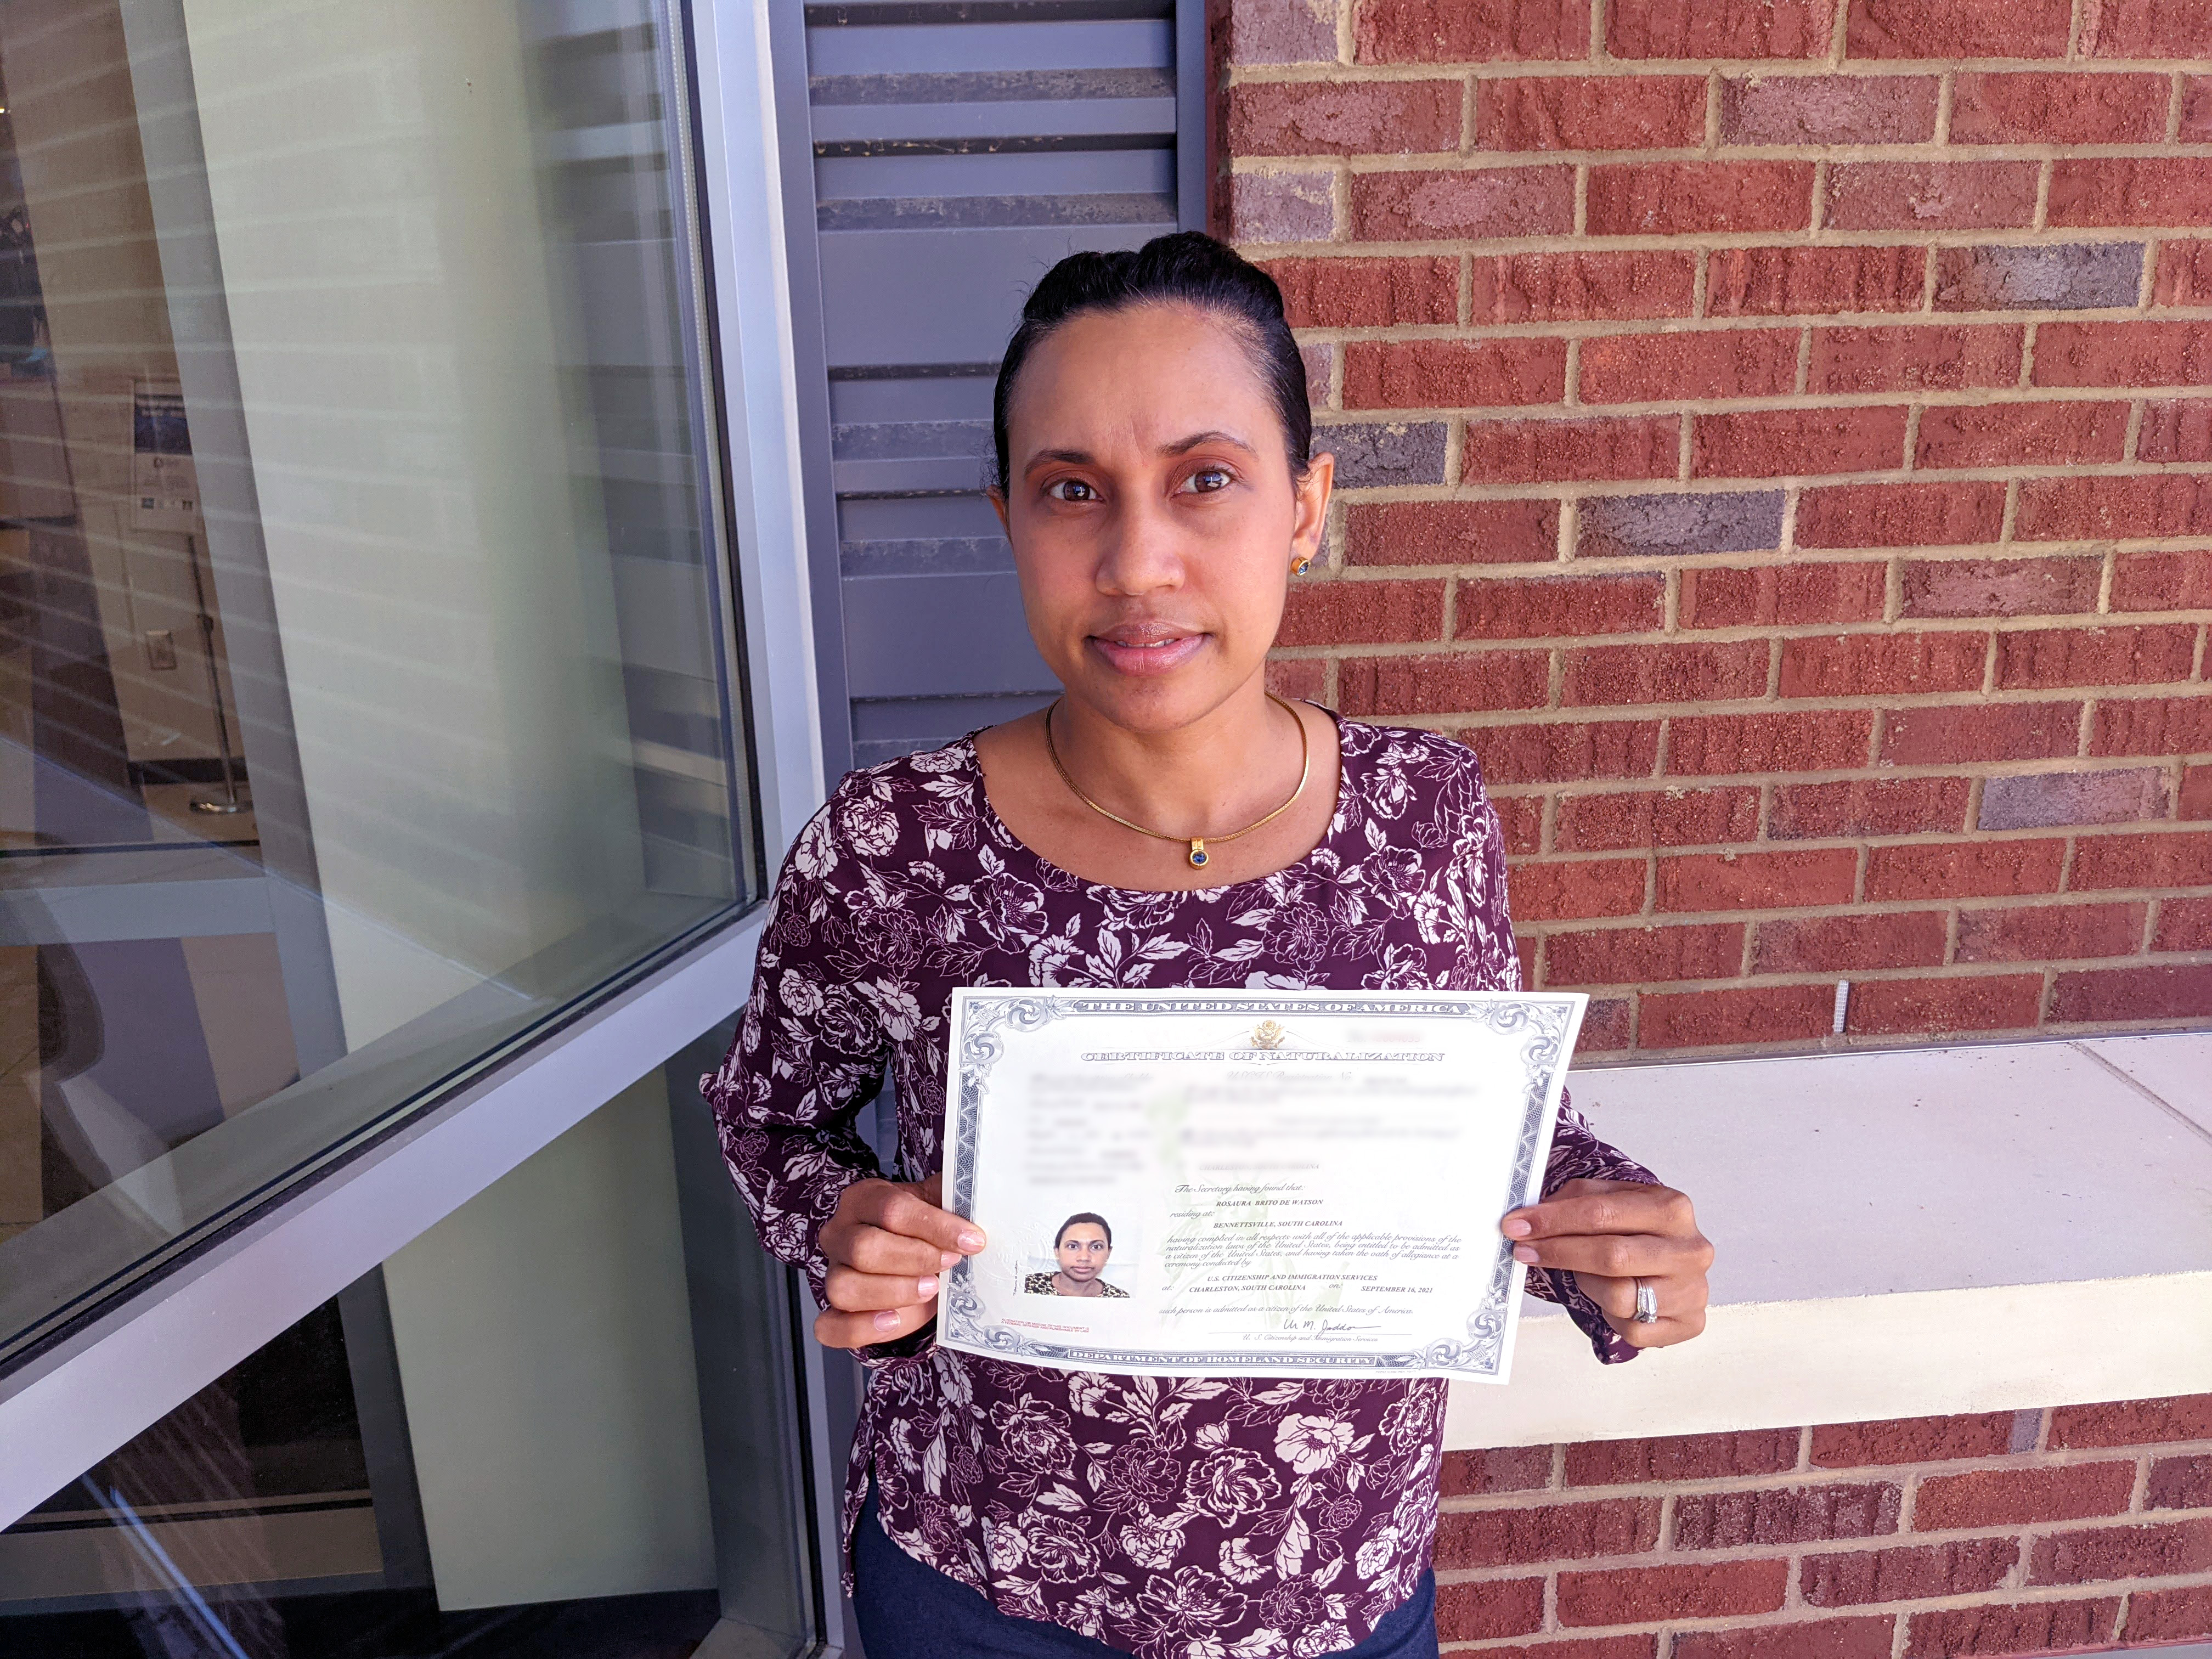 Rosauro De Watson holds her certificate that shows she is a legal US Citizen.